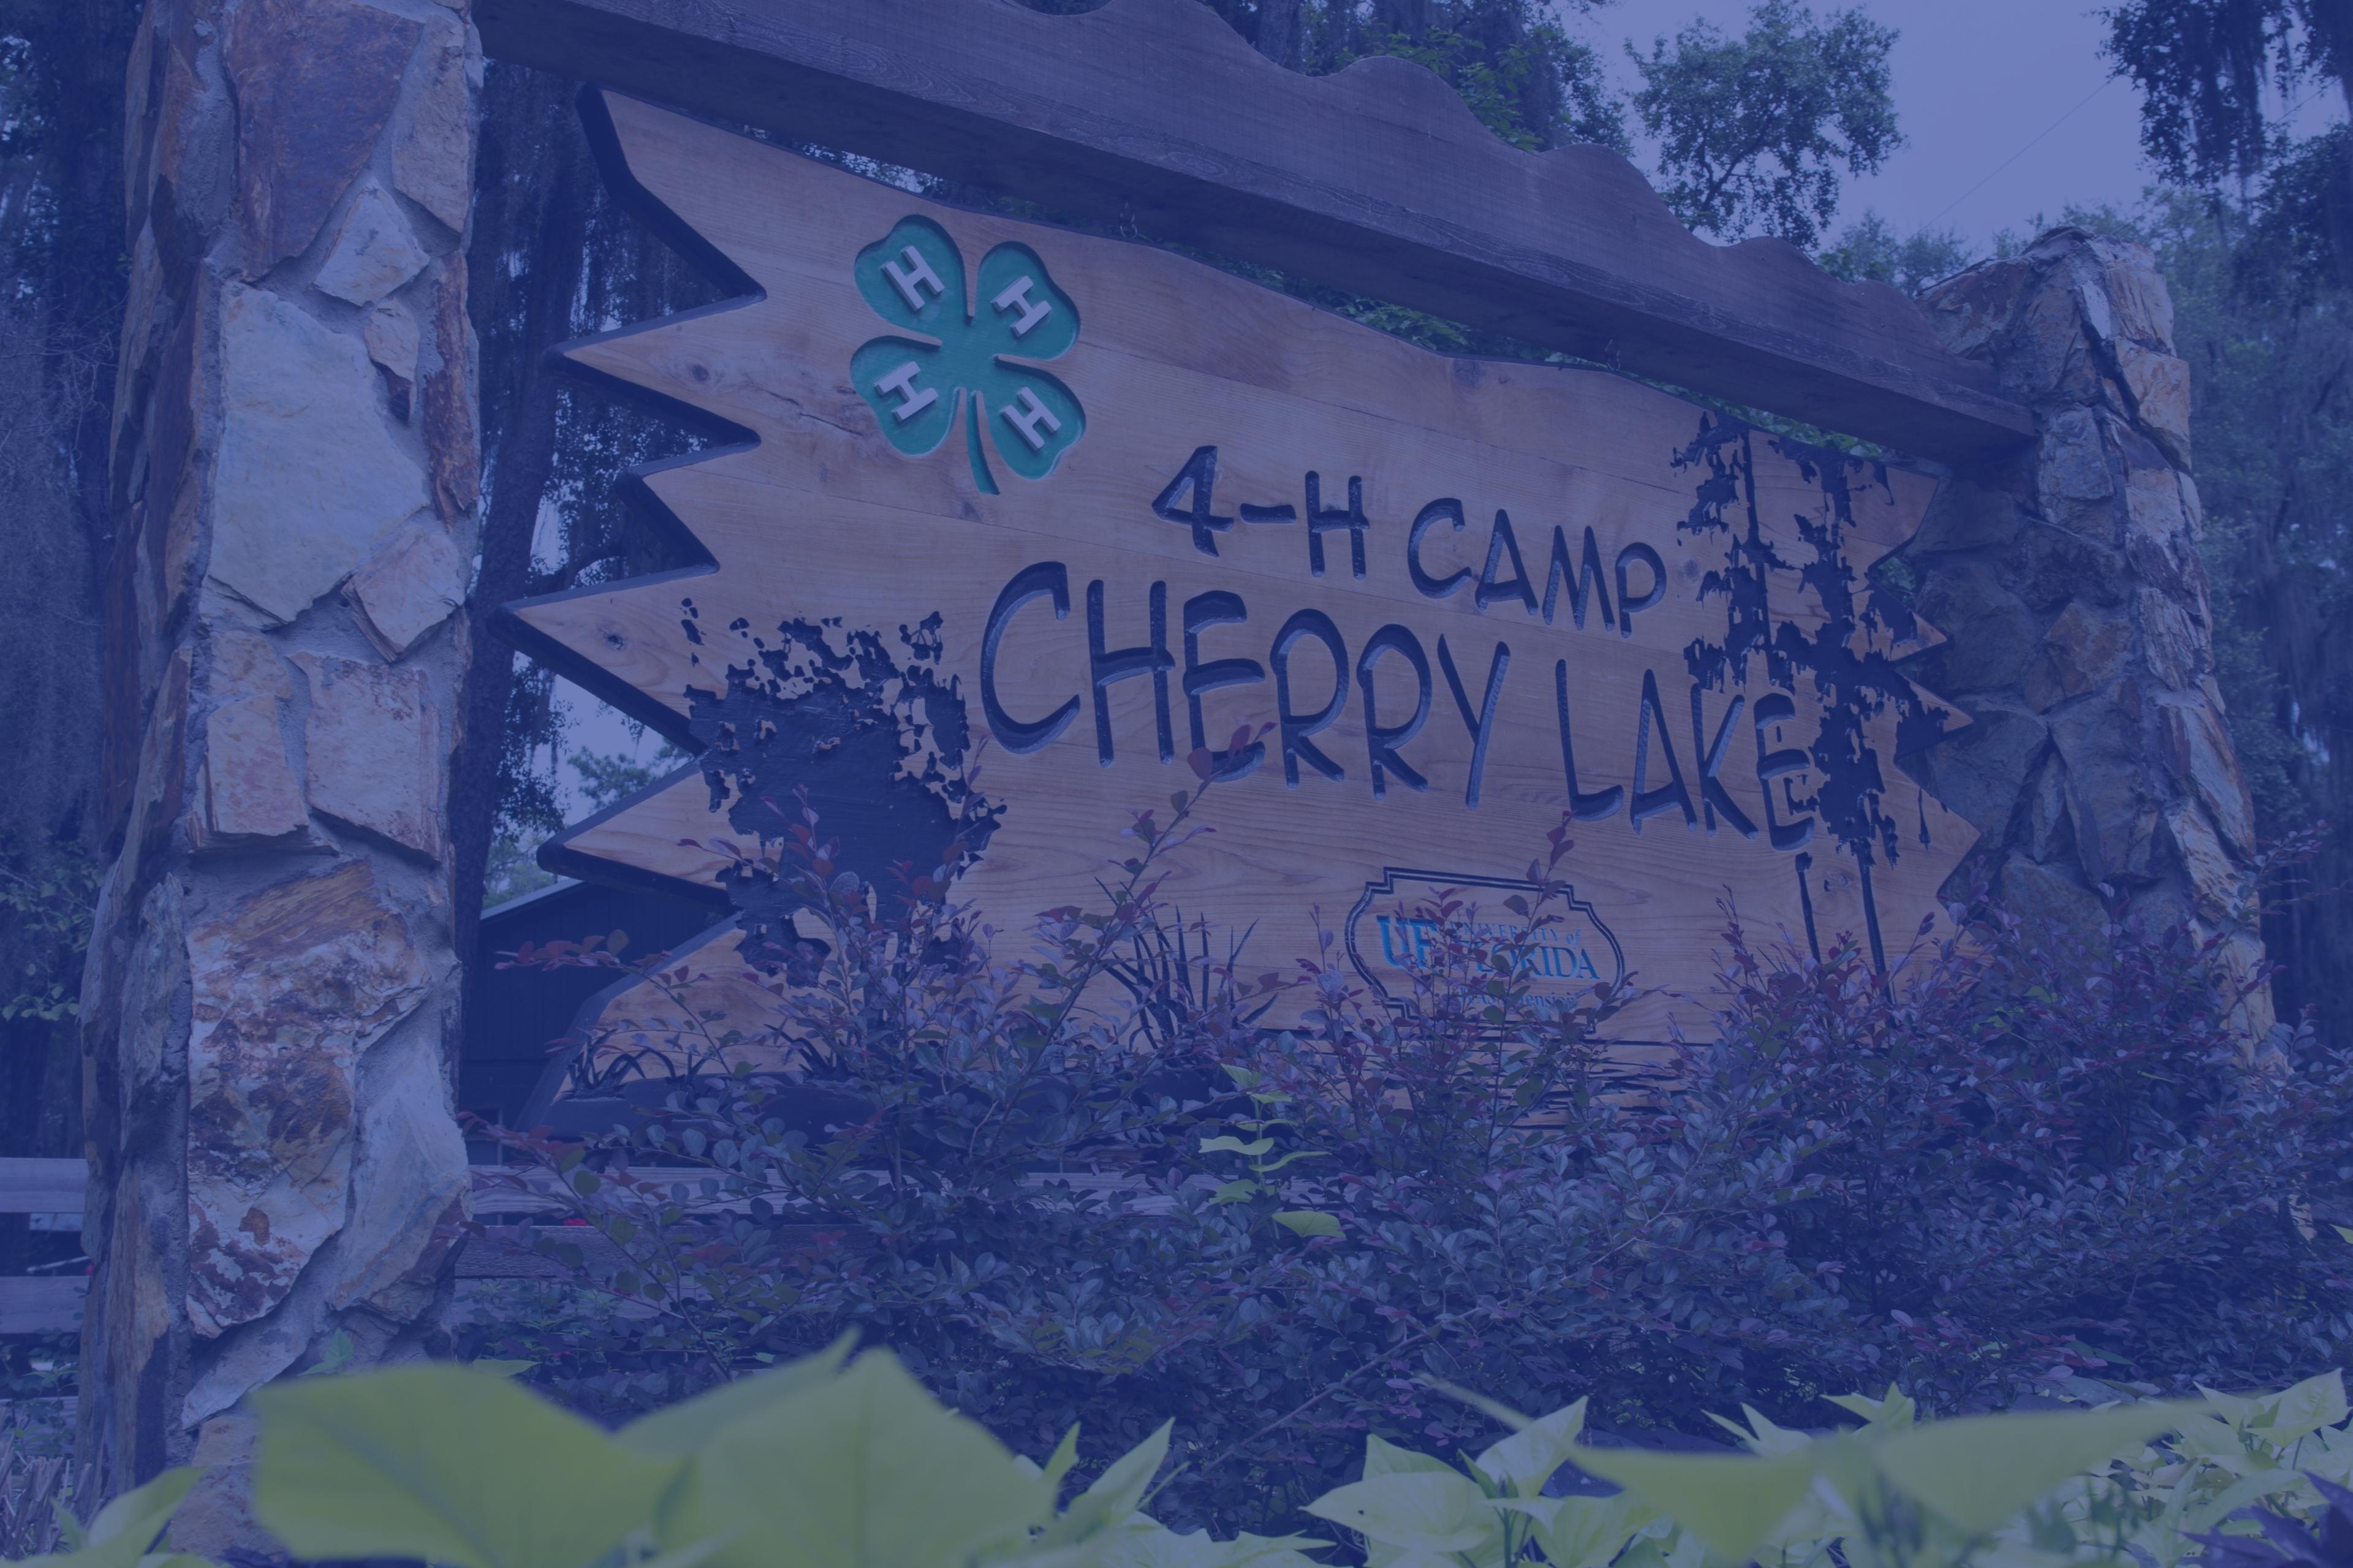 Photo of you Camp Cherry Lake camp sign